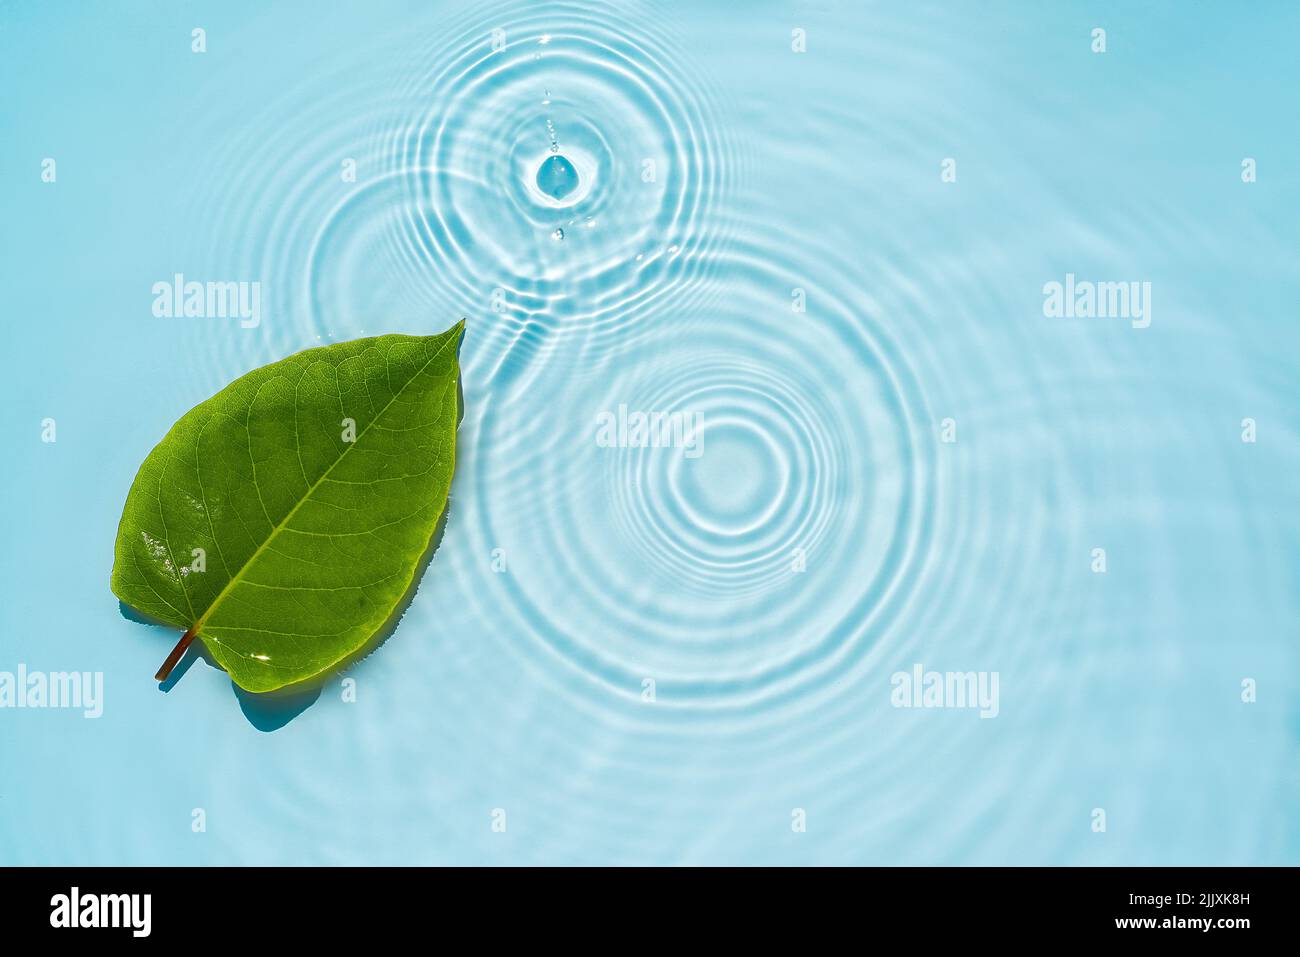 Circle ripples, waves on a transparent, clean background of water with green natural leaves Stock Photo